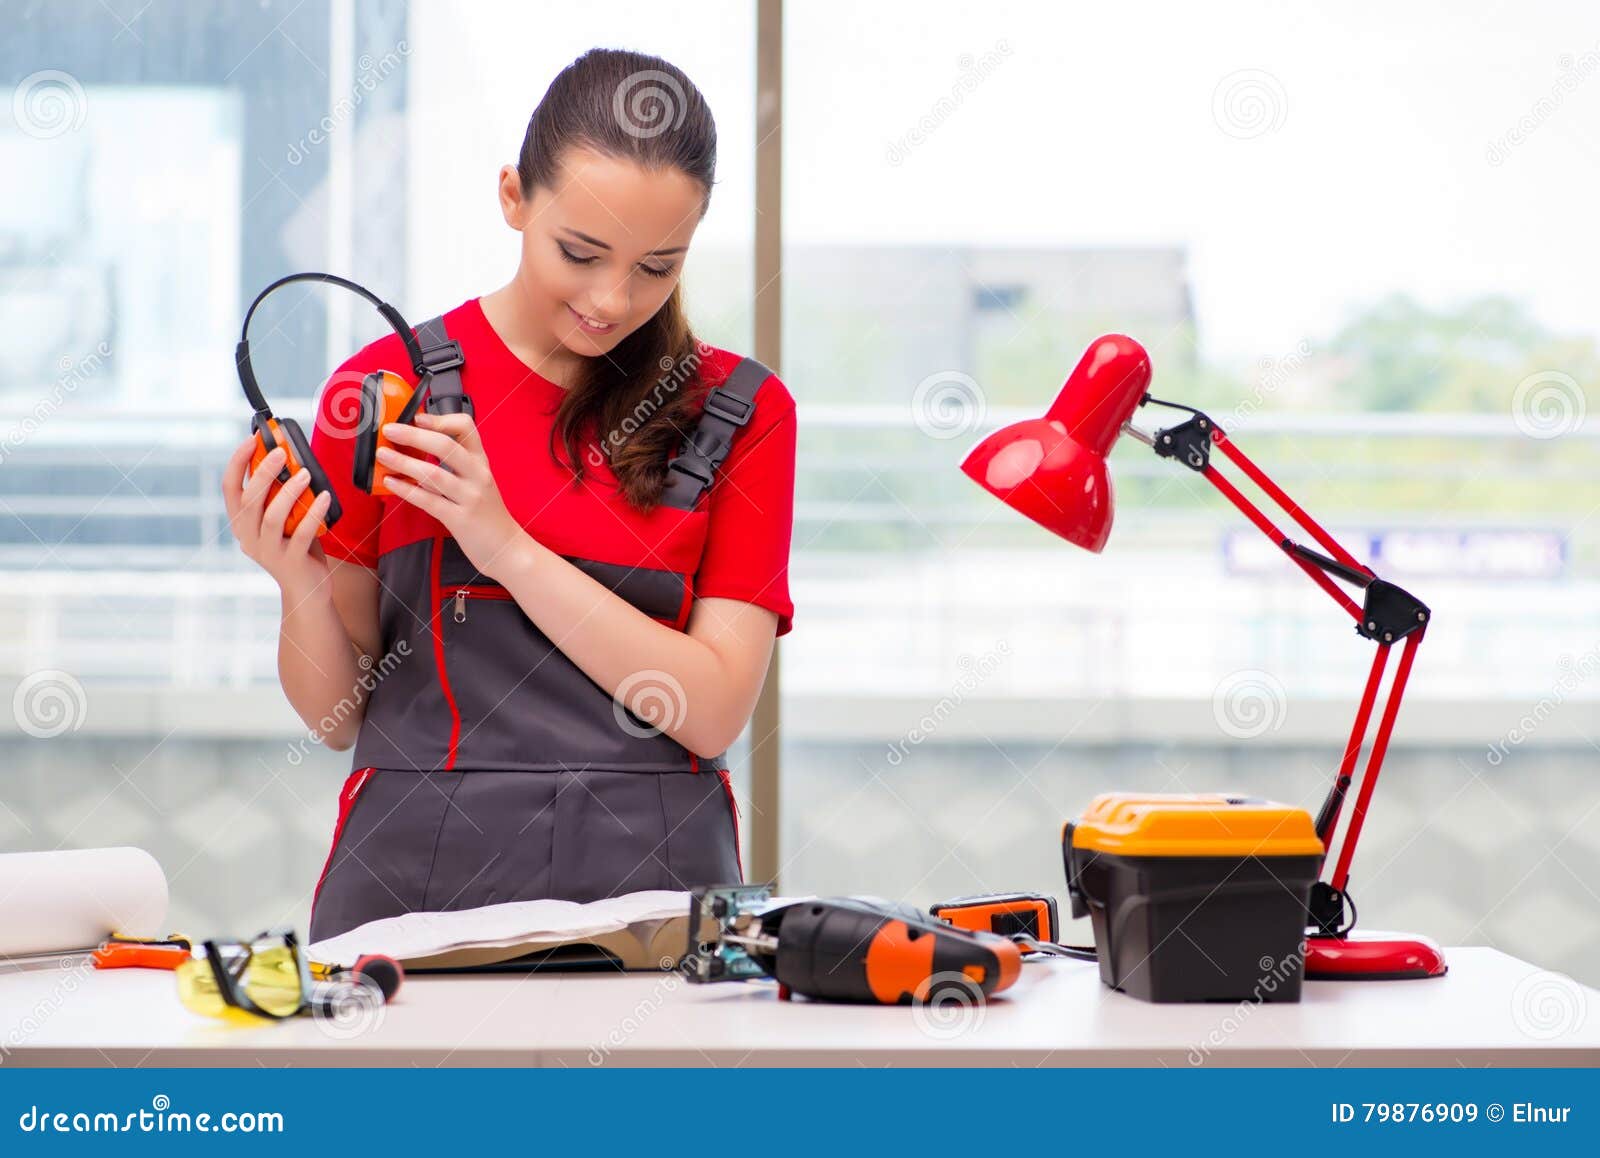 The Young Woman in Coveralls Doing Repairs Stock Image - Image of ...